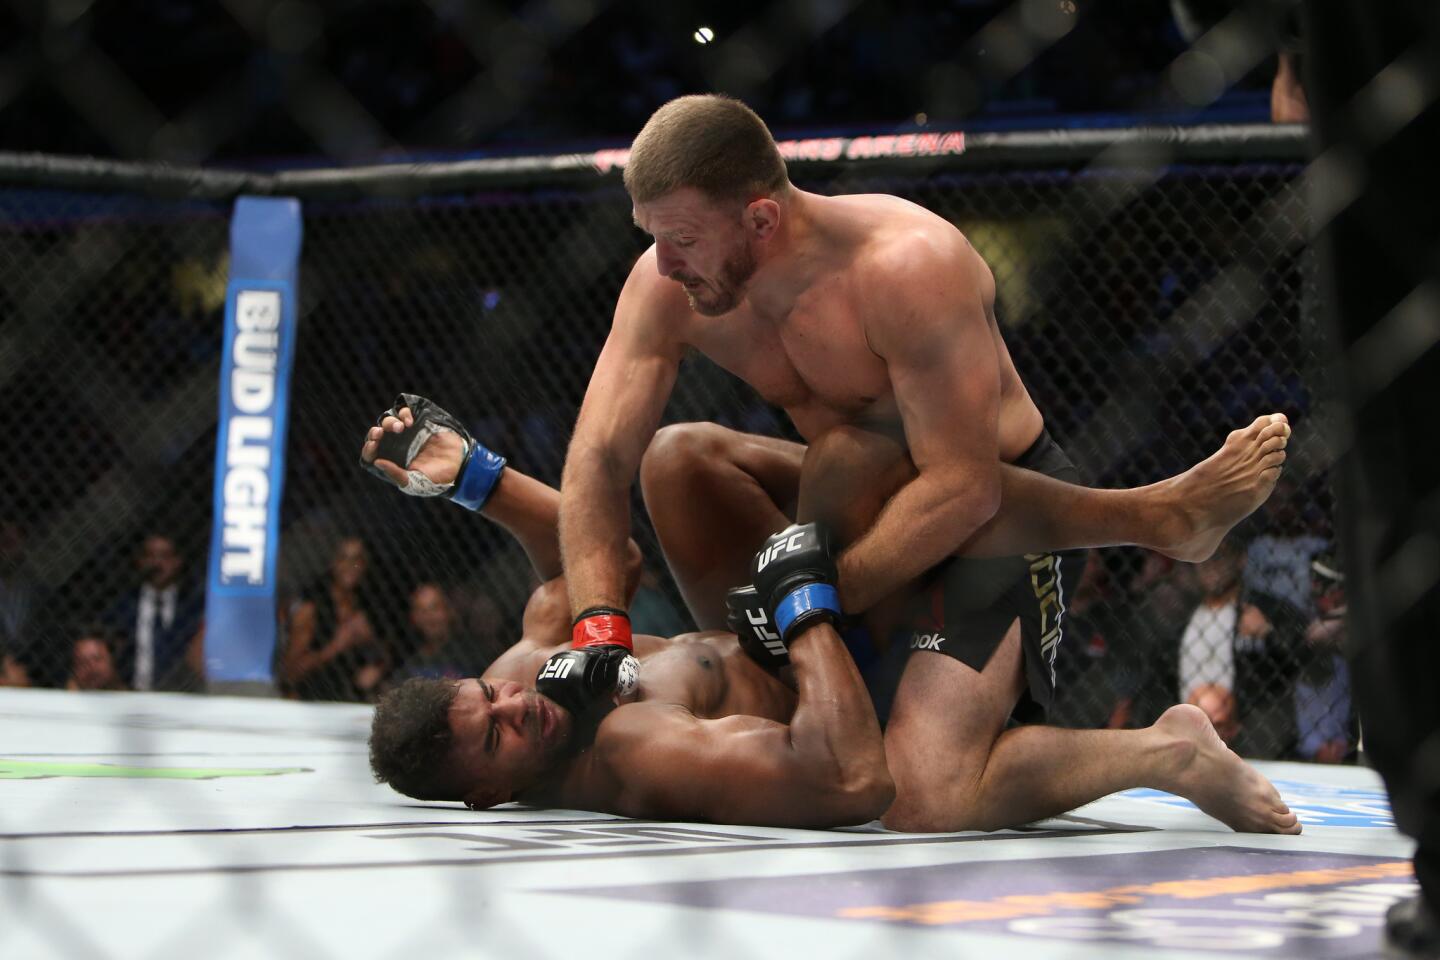 Stipe Miocic, top, punches Alistair Overeem on Sept. 10 at UFC 203 event in Cleveland.